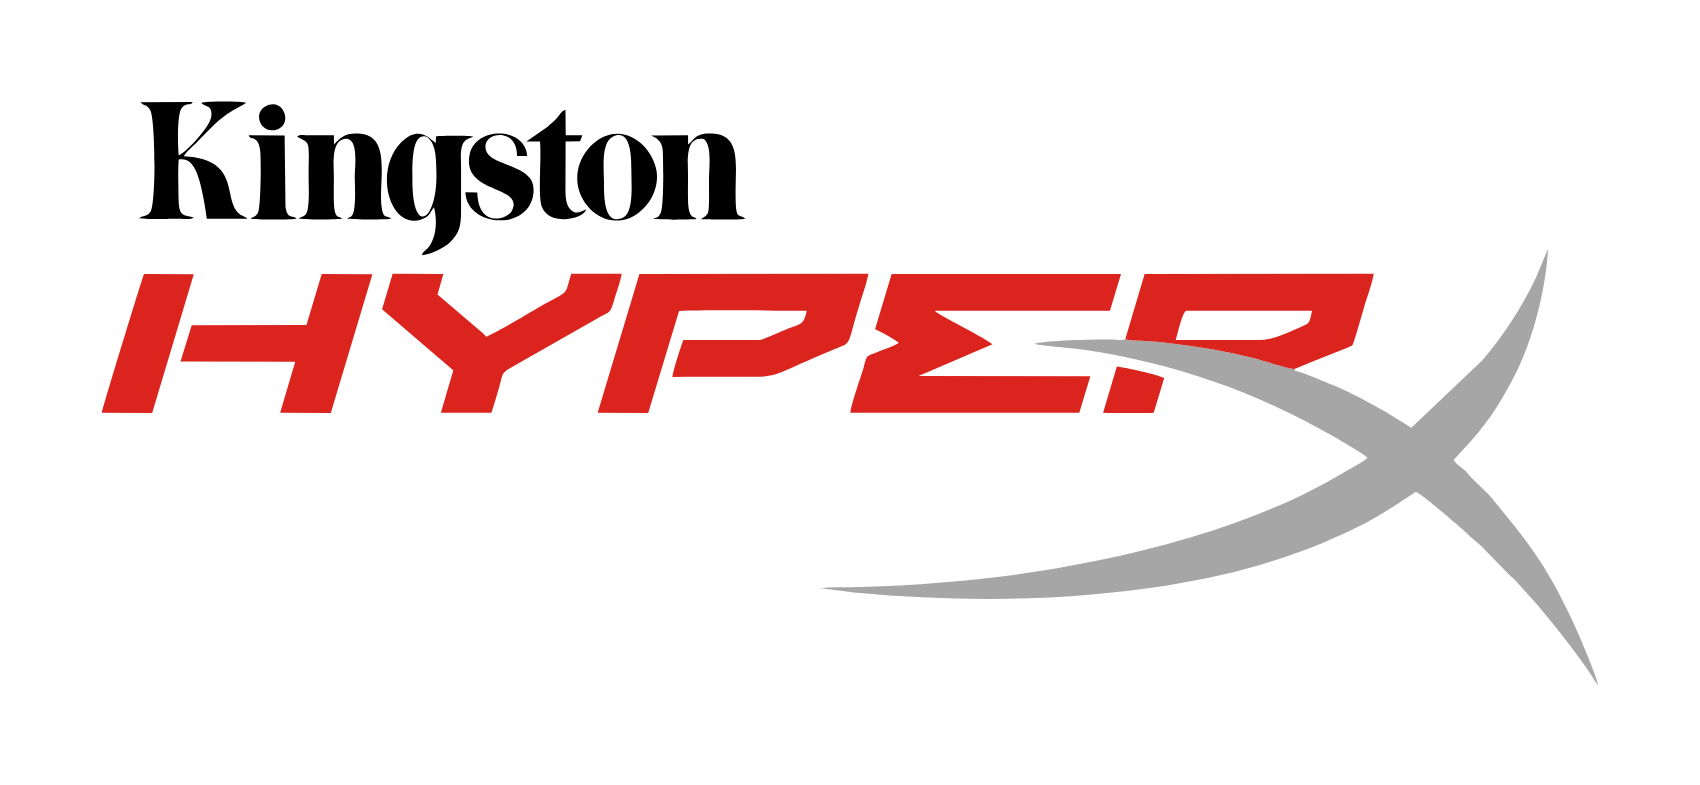 Download Kingston hyperx Logo PNG and Vector (PDF, SVG, Ai, EPS) Free